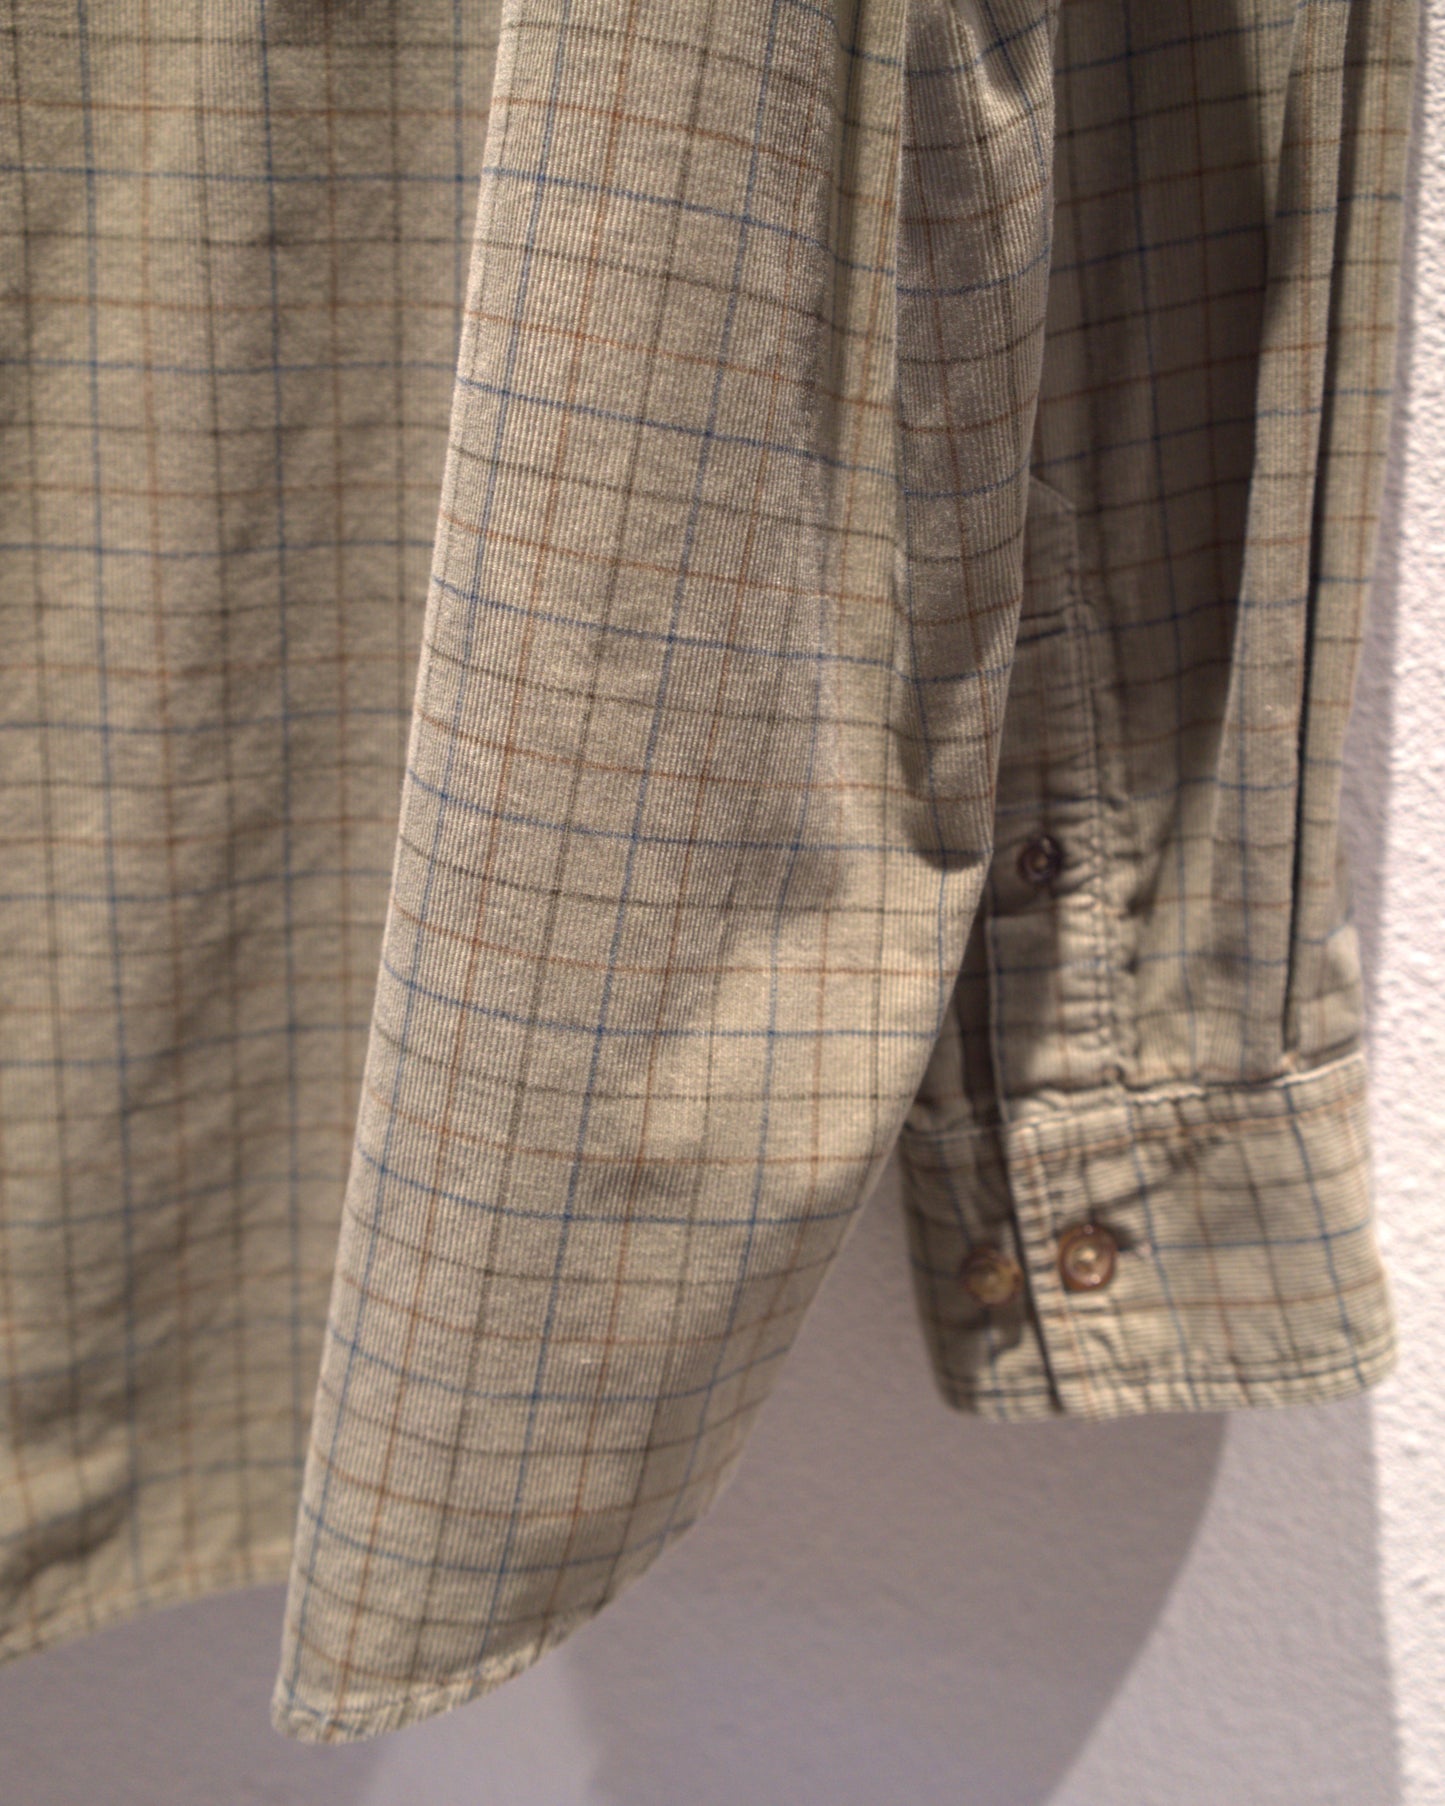 90's-00's Checked corduroy button-down shirt